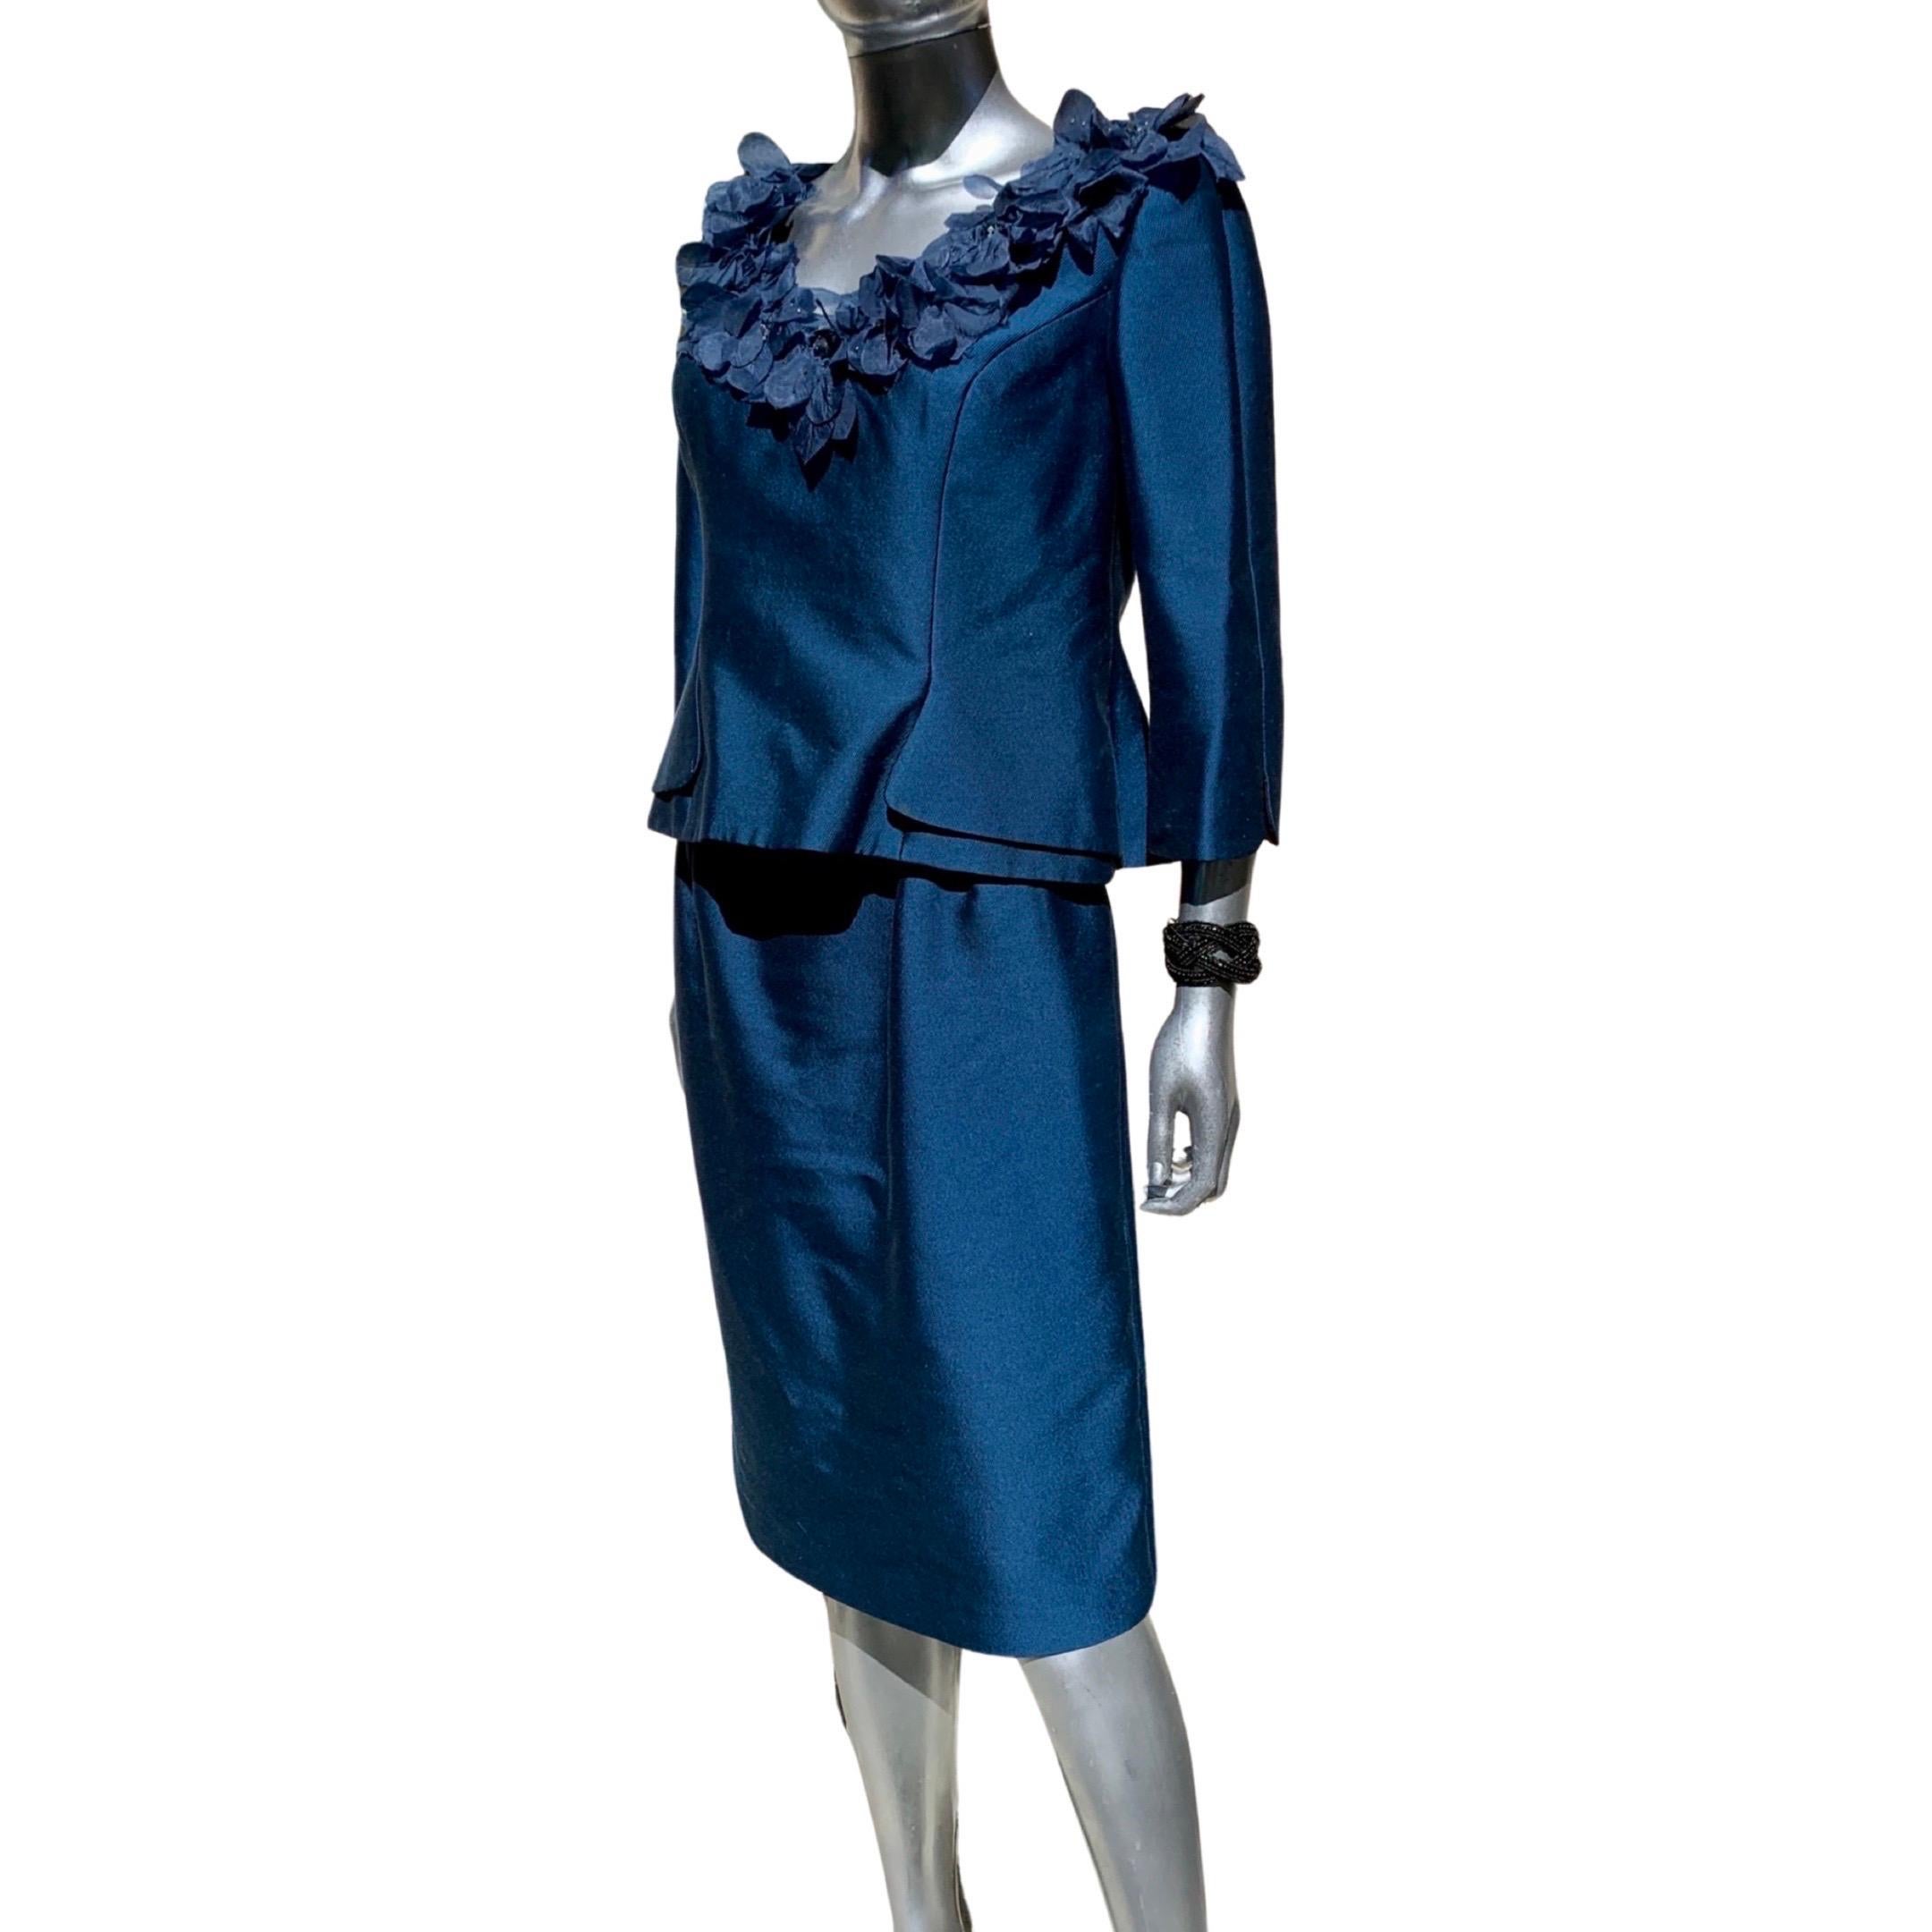 Three Piece Saphire Blue Couture Evening Ensemble by Lily Samii SF Size 8 For Sale 4